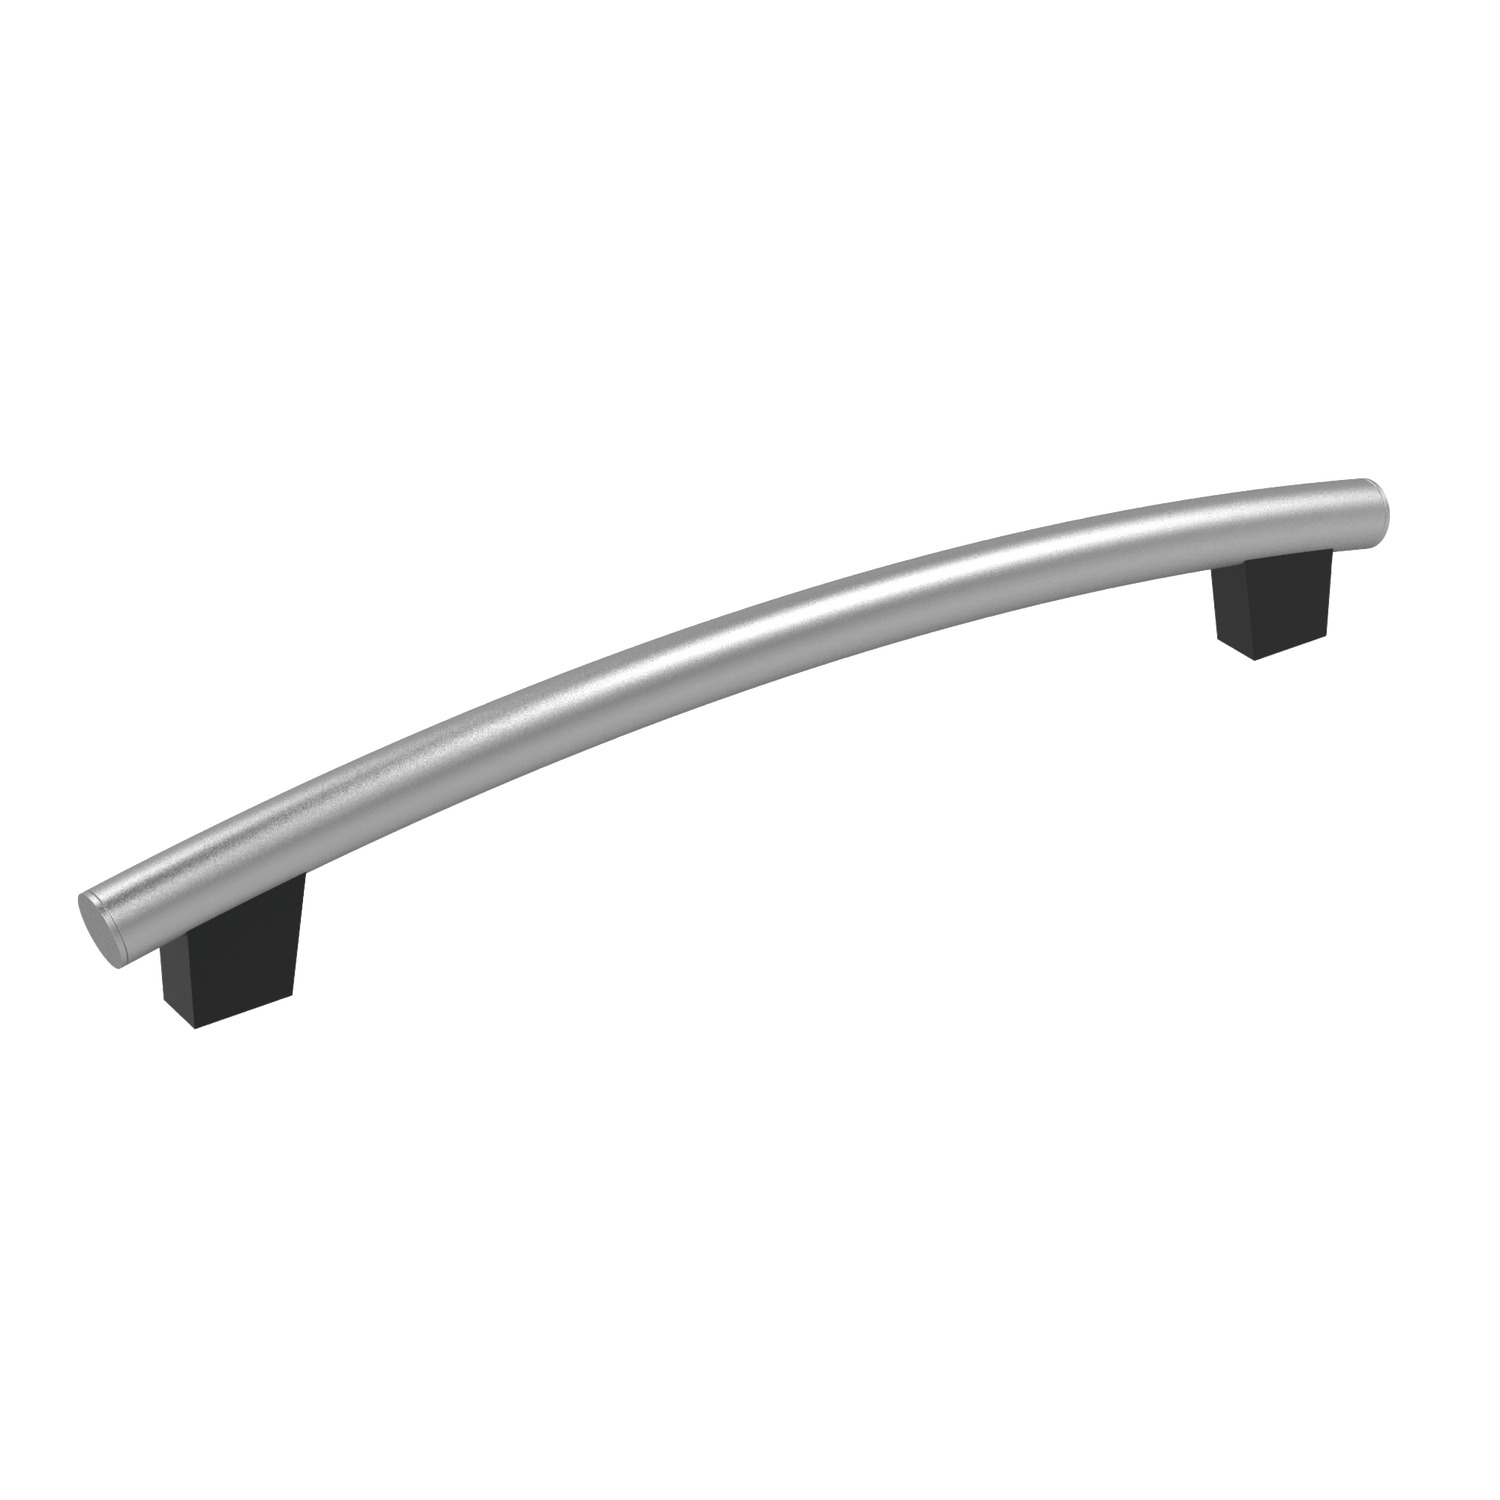 Handles A modern industrial curved tube handle ranging from 600 to 700mm in length. Minimum stress resistance 1000N.